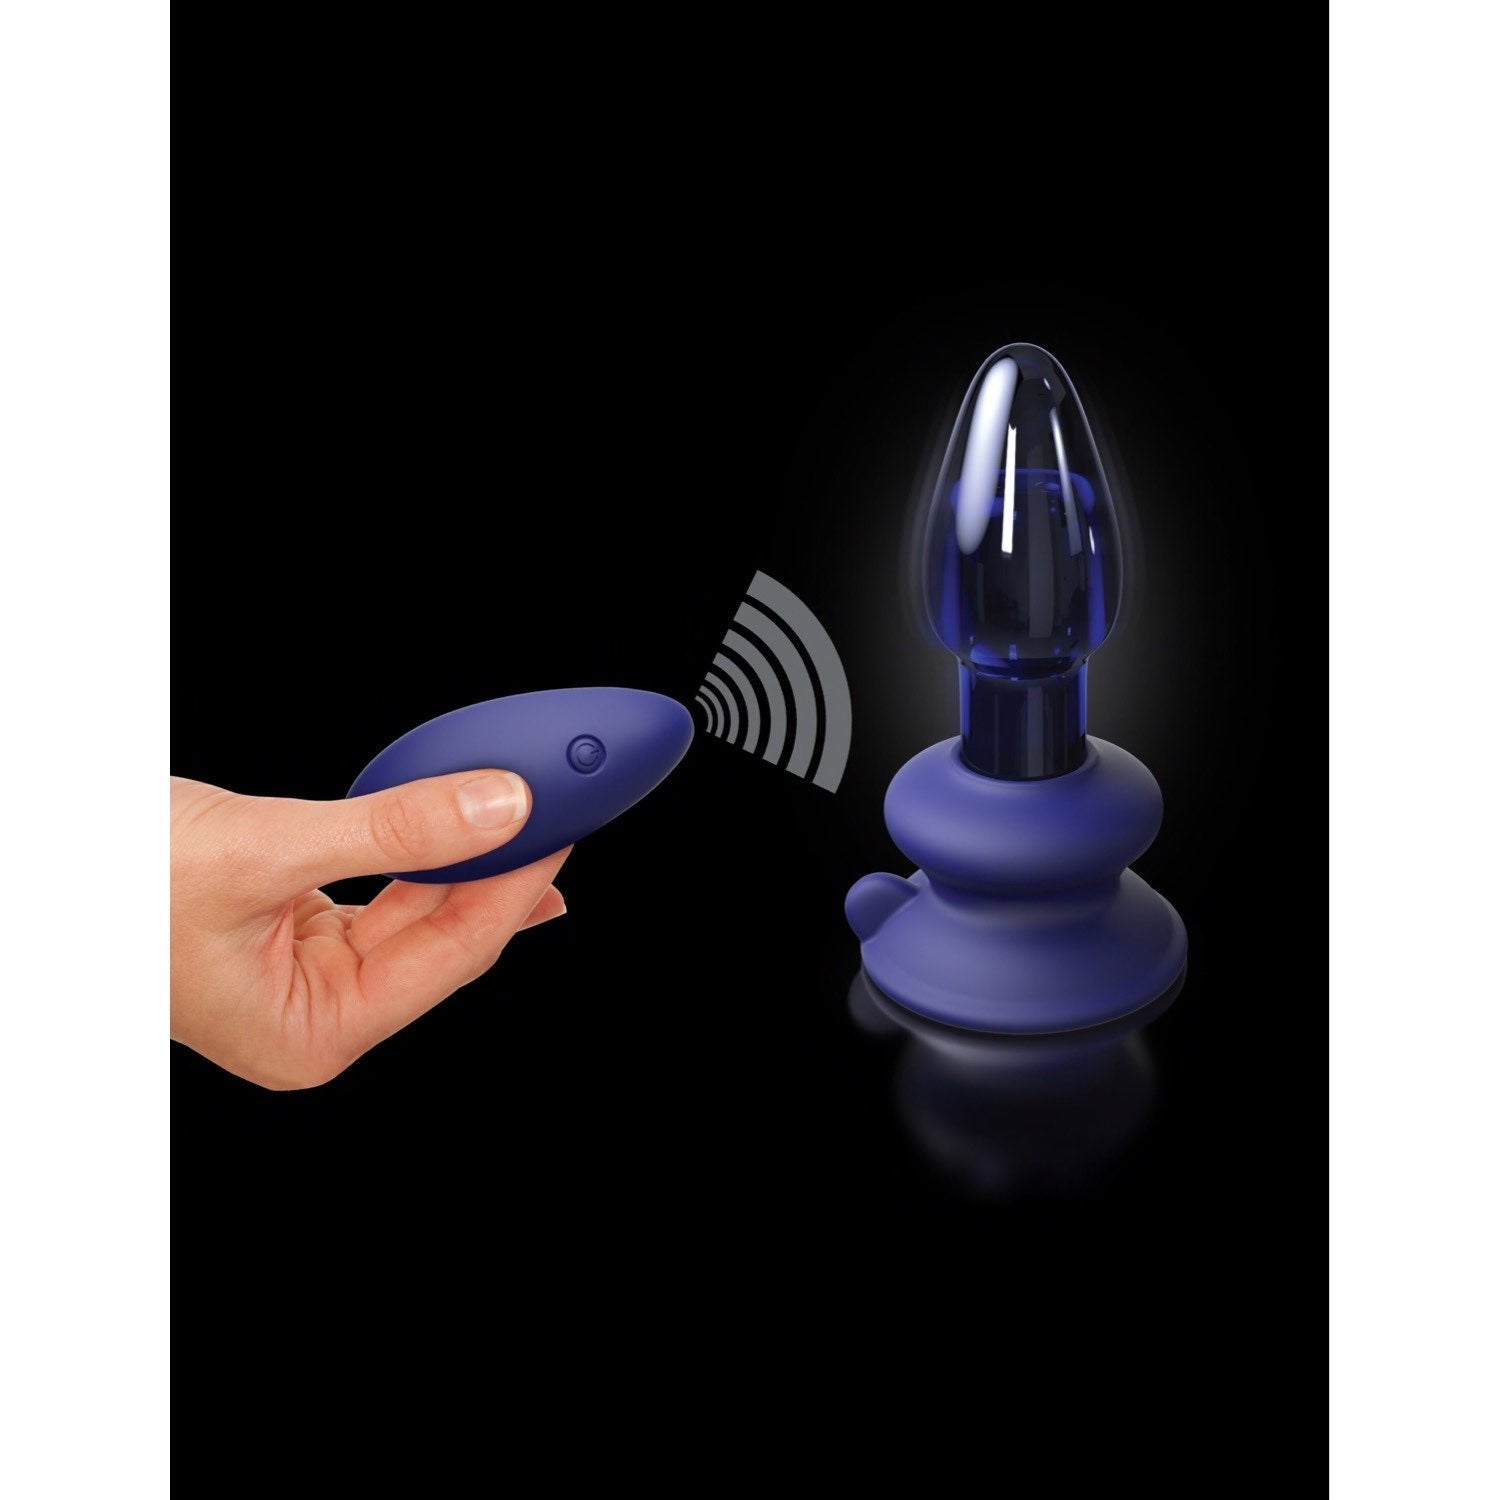 Icicles No. 85 - Blue Glass USB Rechargeable Vibrating Butt Plug with Remote by Pipedream